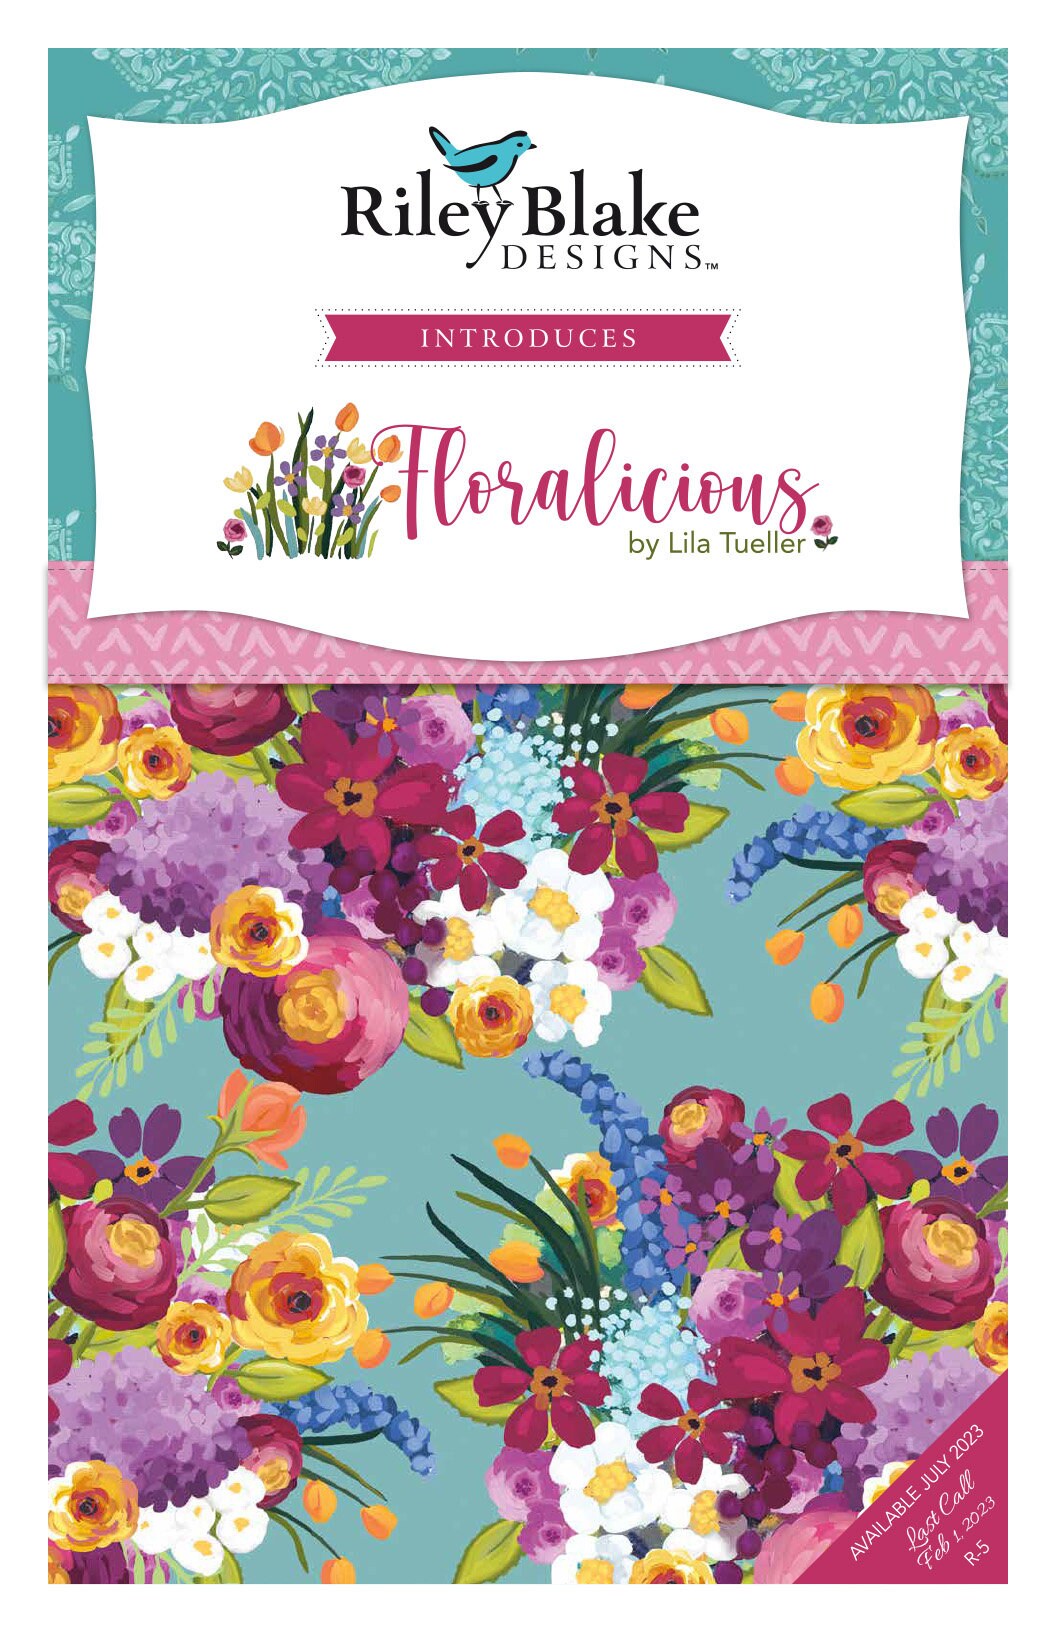 Floralicious Lilac Floral Stems Fabric by Lila Tueller - Riley